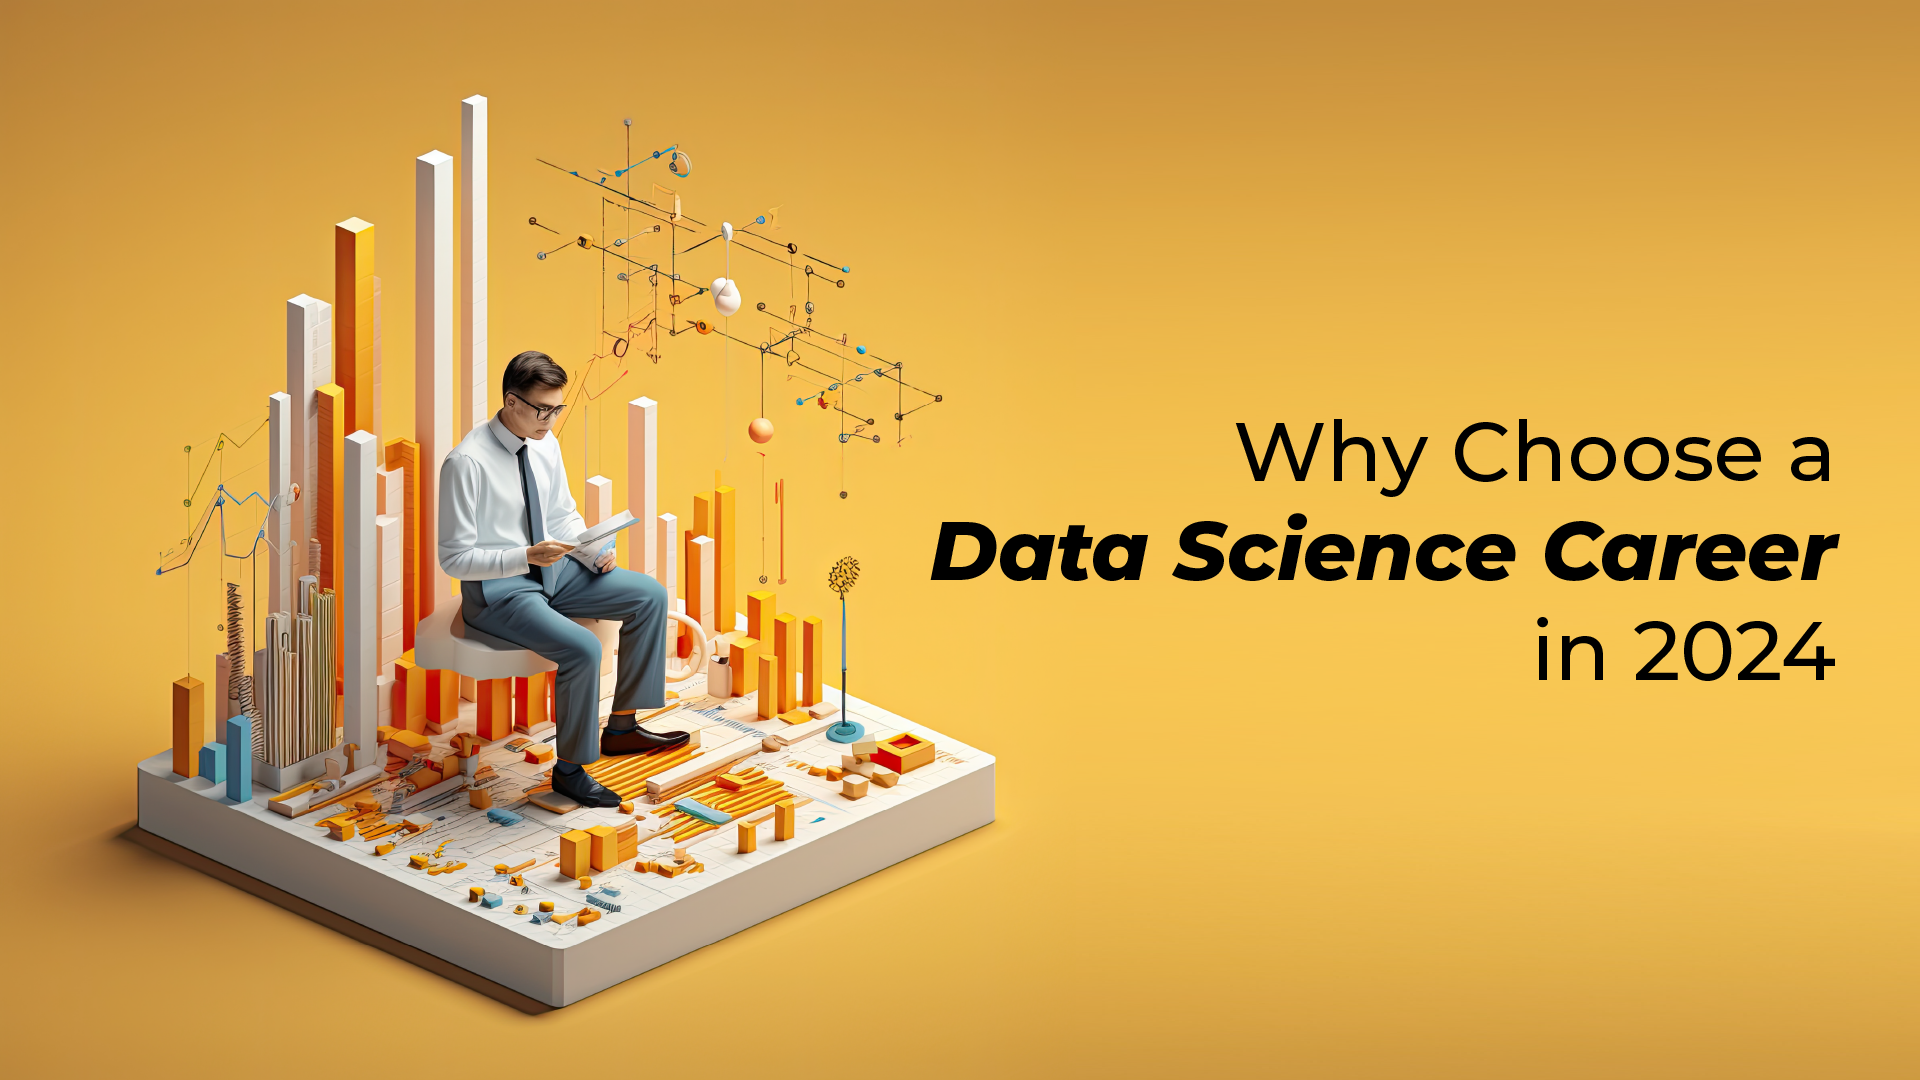 Why Choose a Data Science Career in 2024